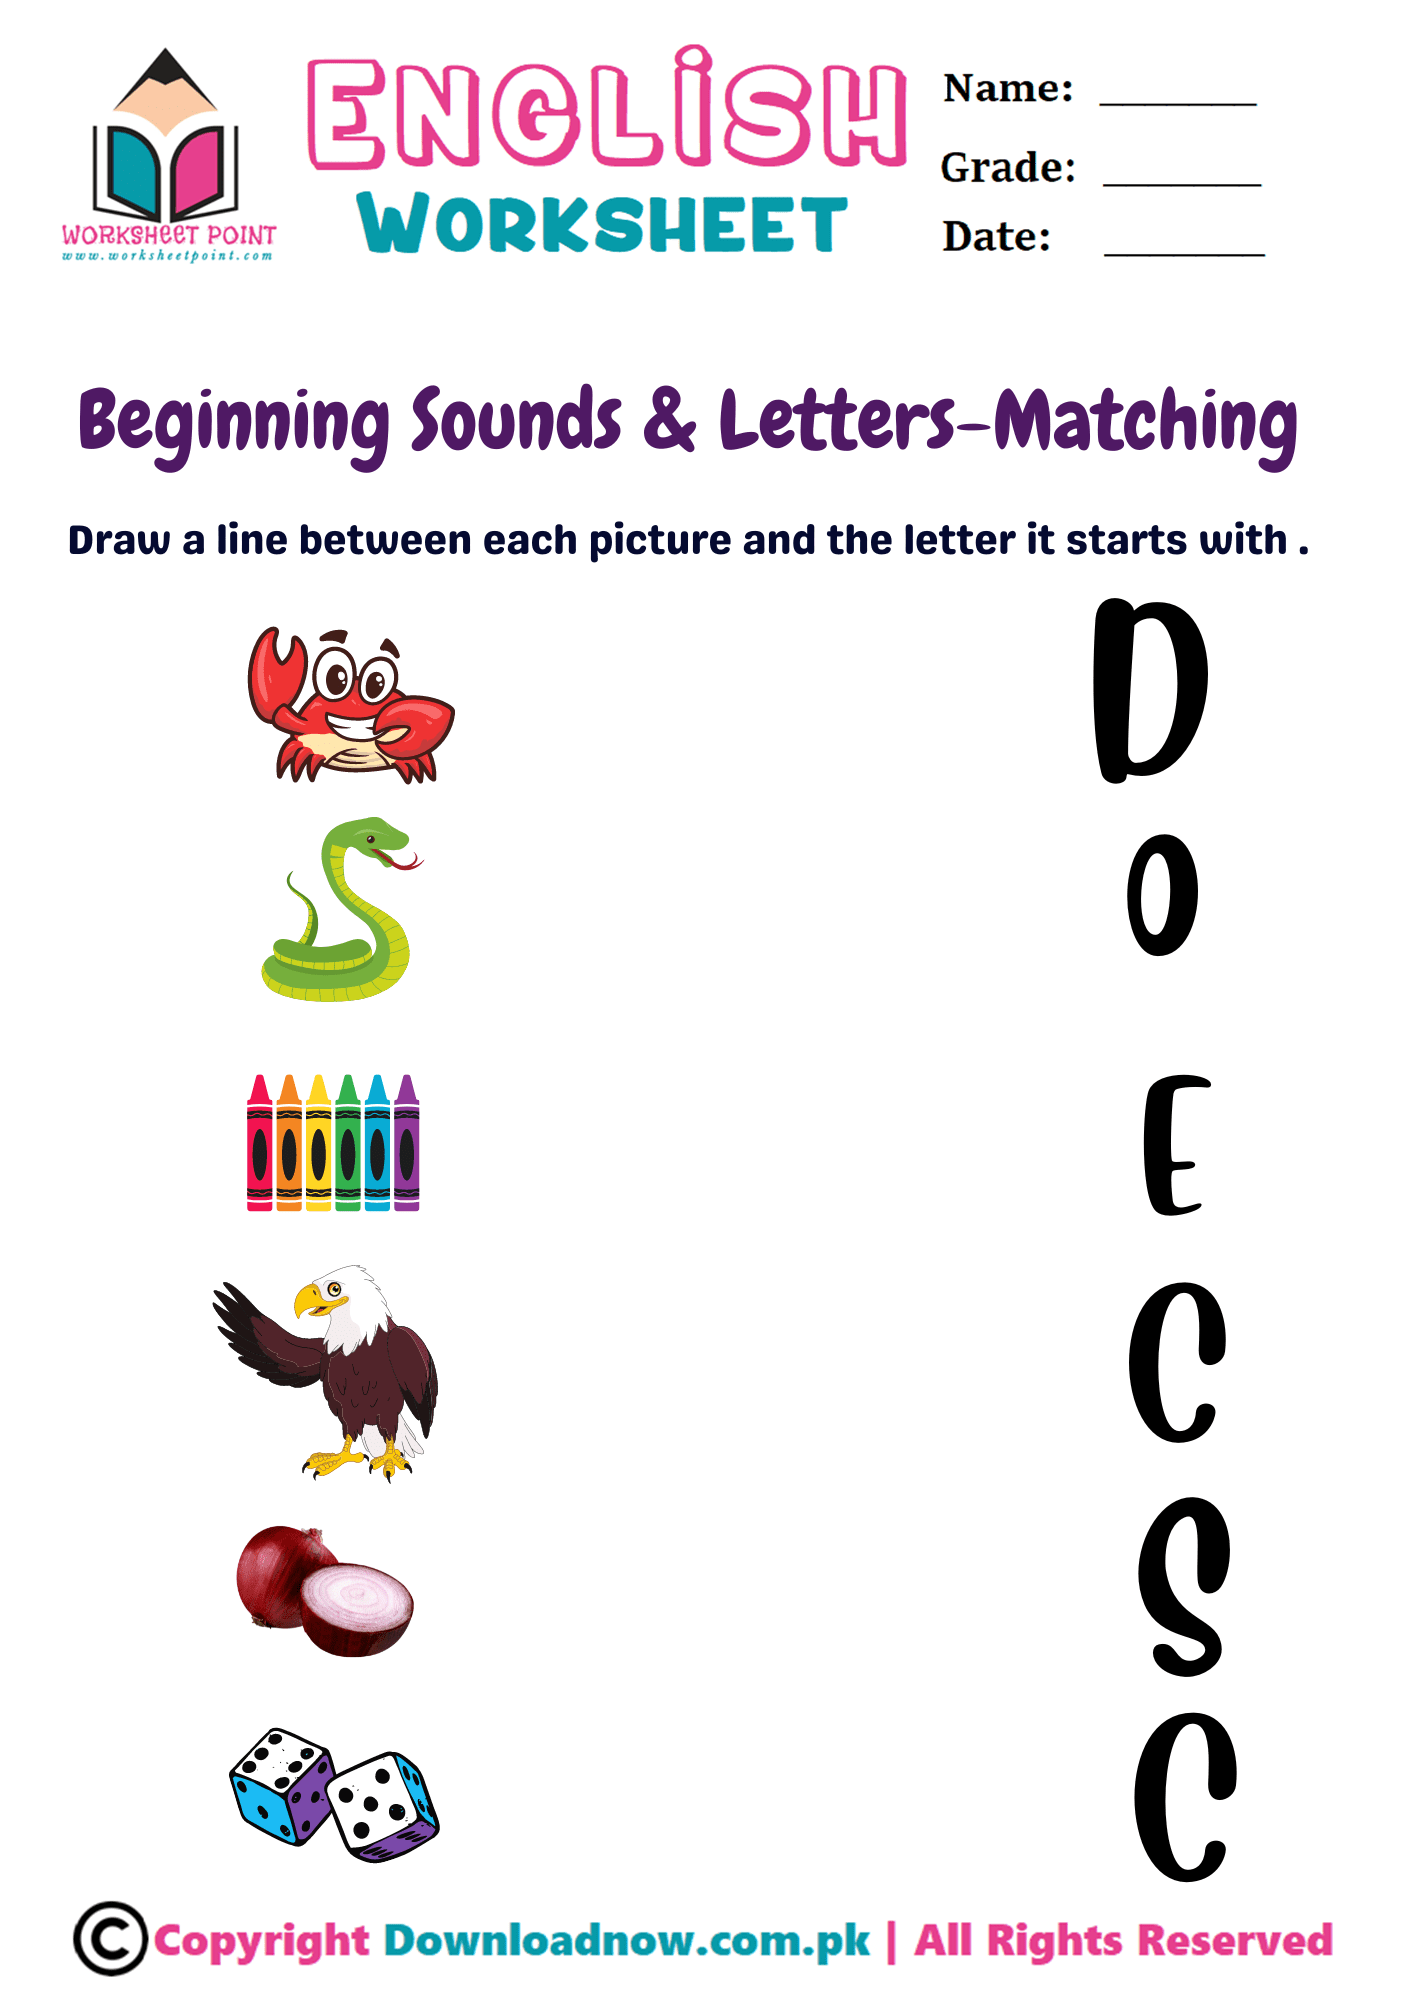 Rich Results on Google's SERP when searching for 'beginning sounds and letters matching (d)'